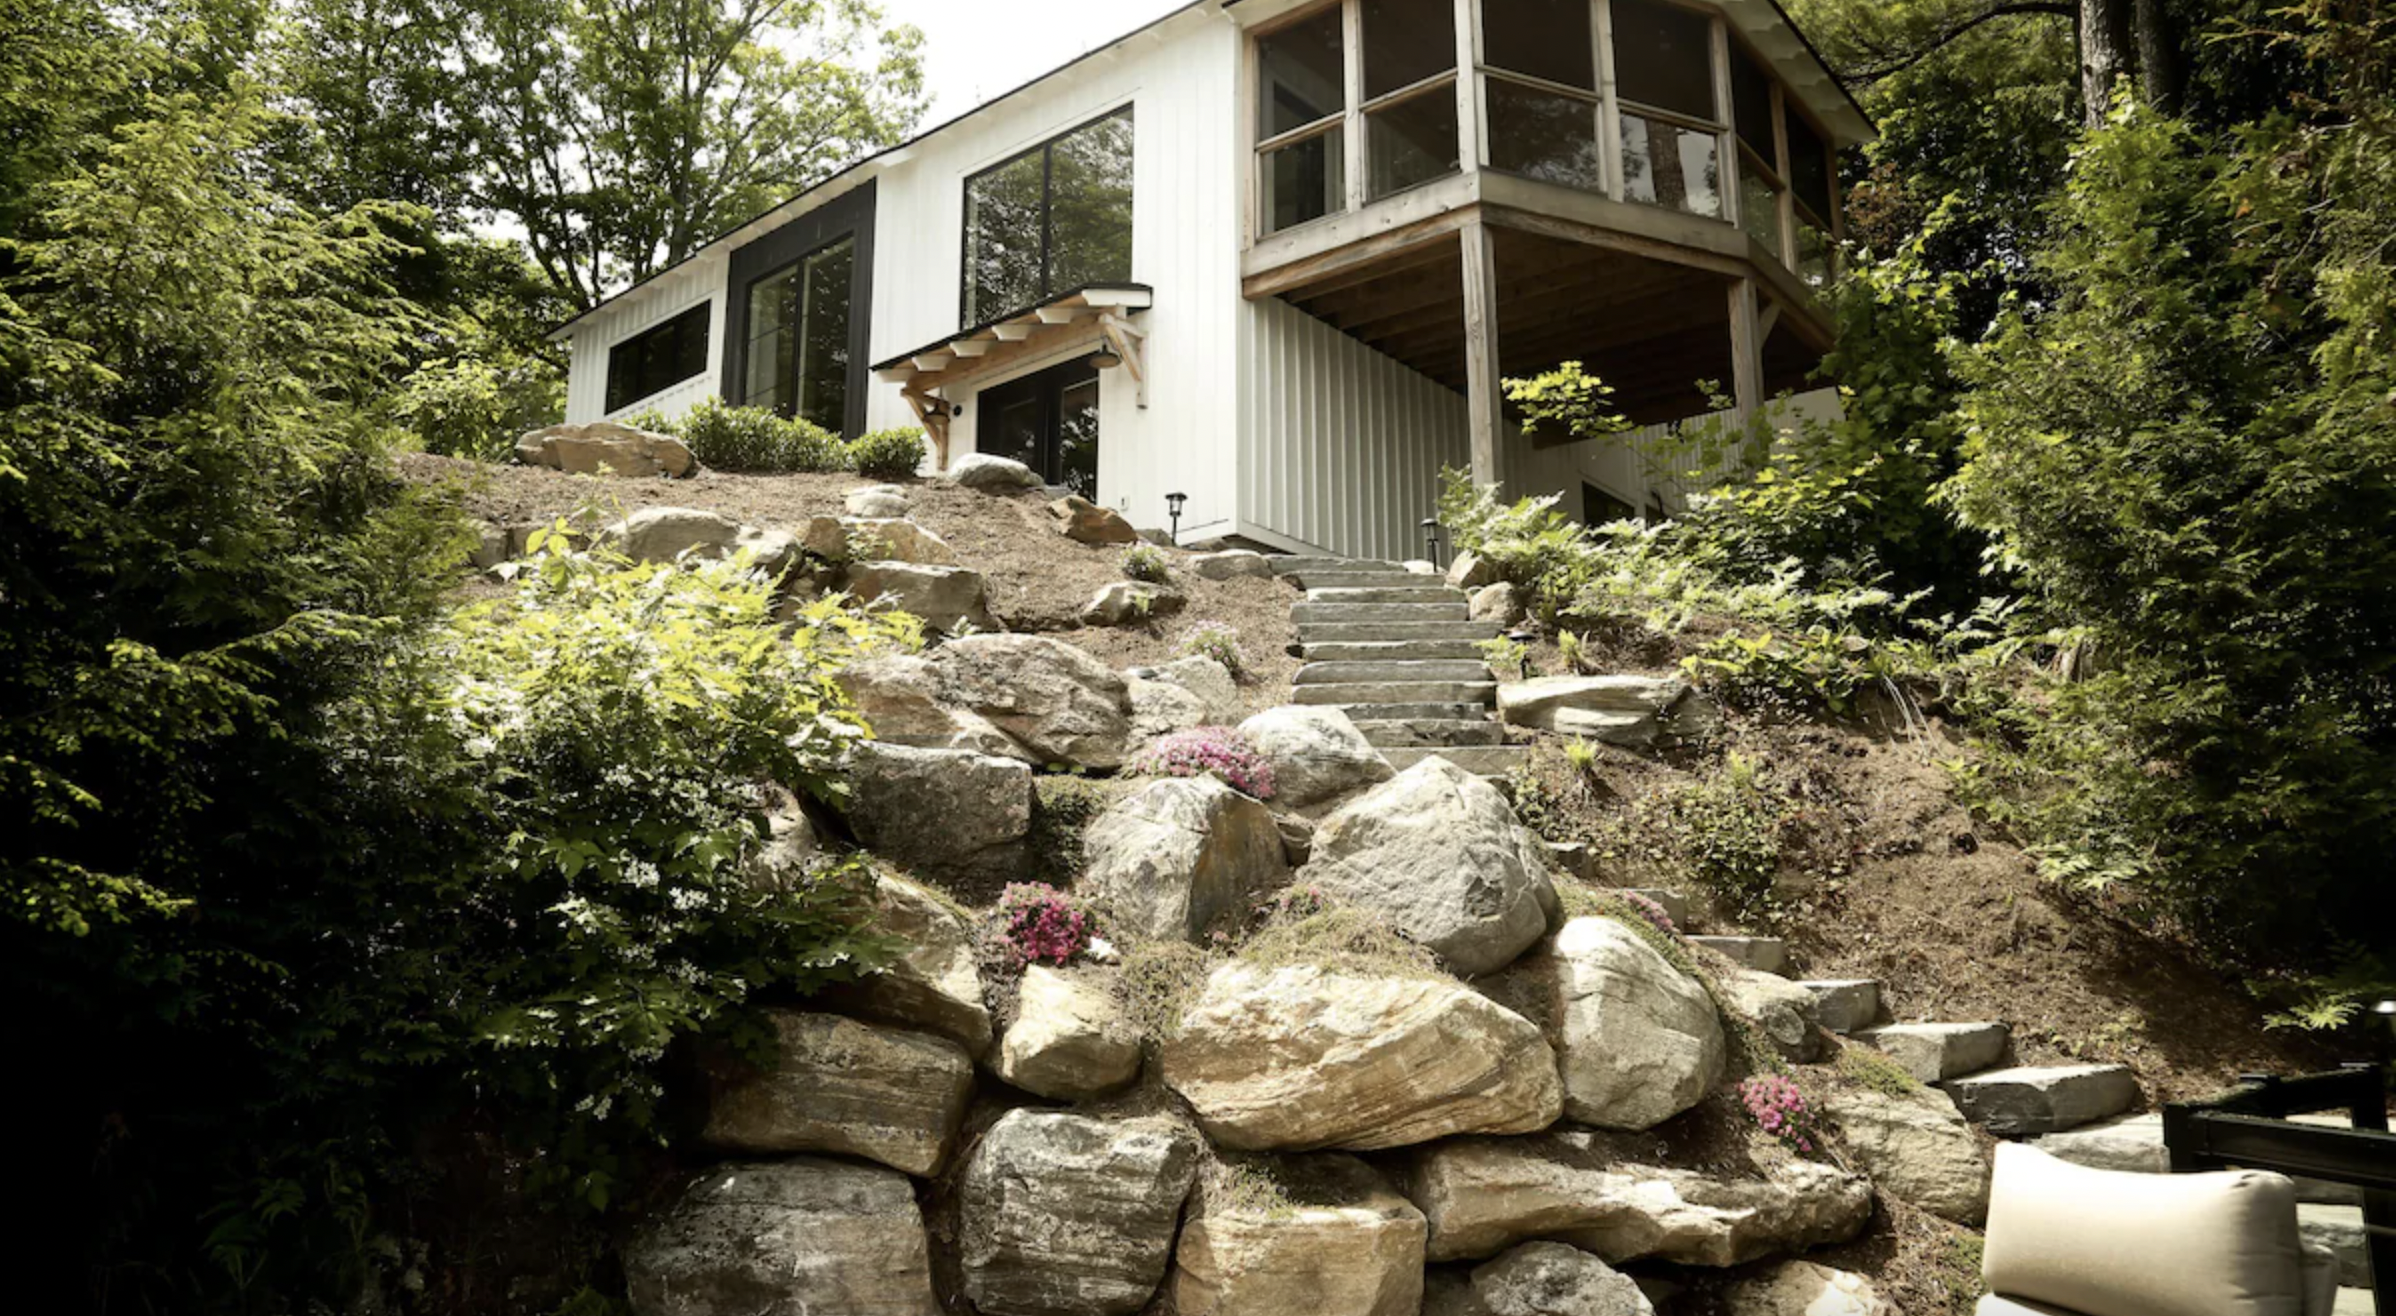 the outside of the cottage with a rock pathway in the foreground